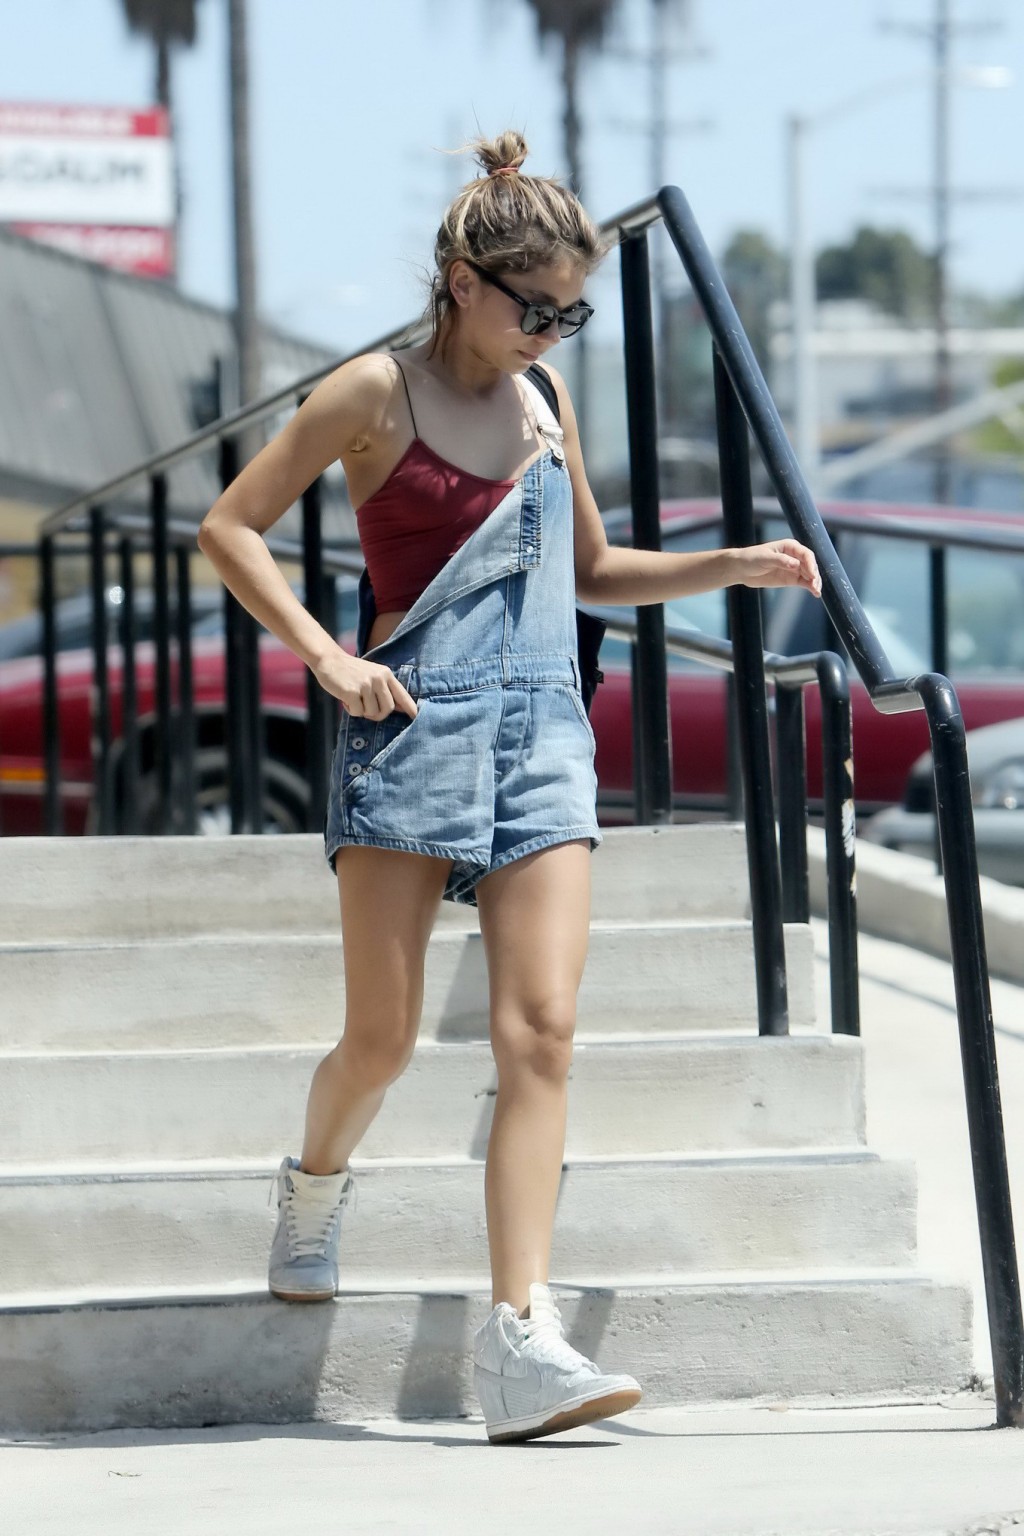 Sarah Hyland showing nipple pokies in belly top and shorts while shopping in LA #75161981